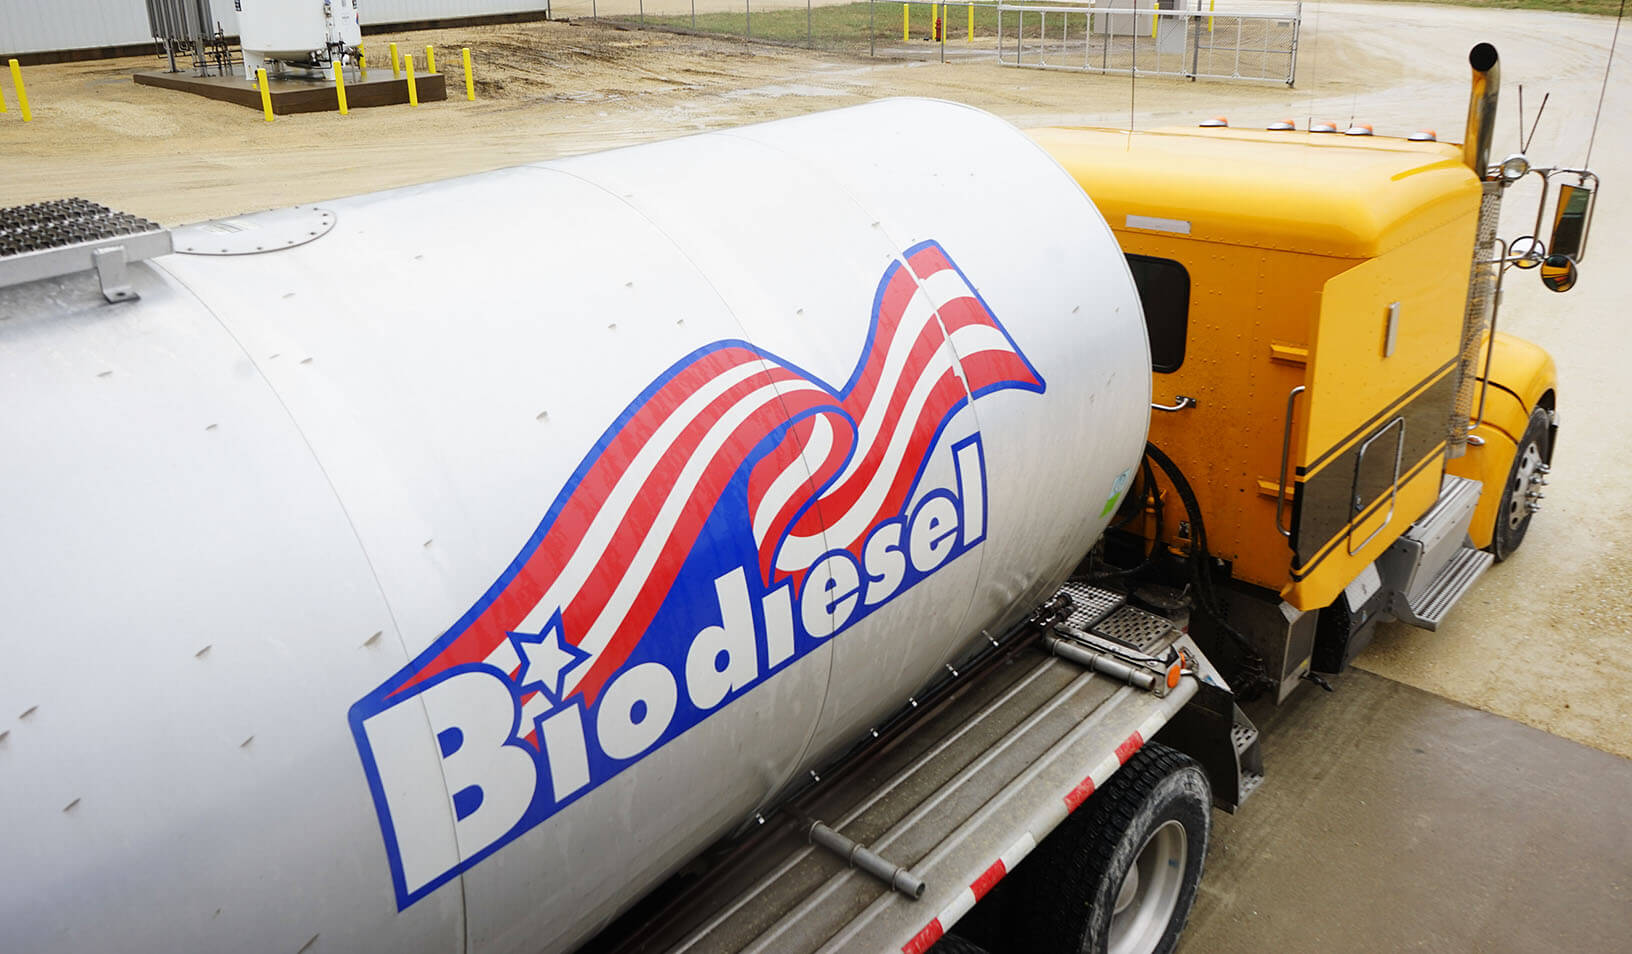 Biodiesel truck with yellow cab